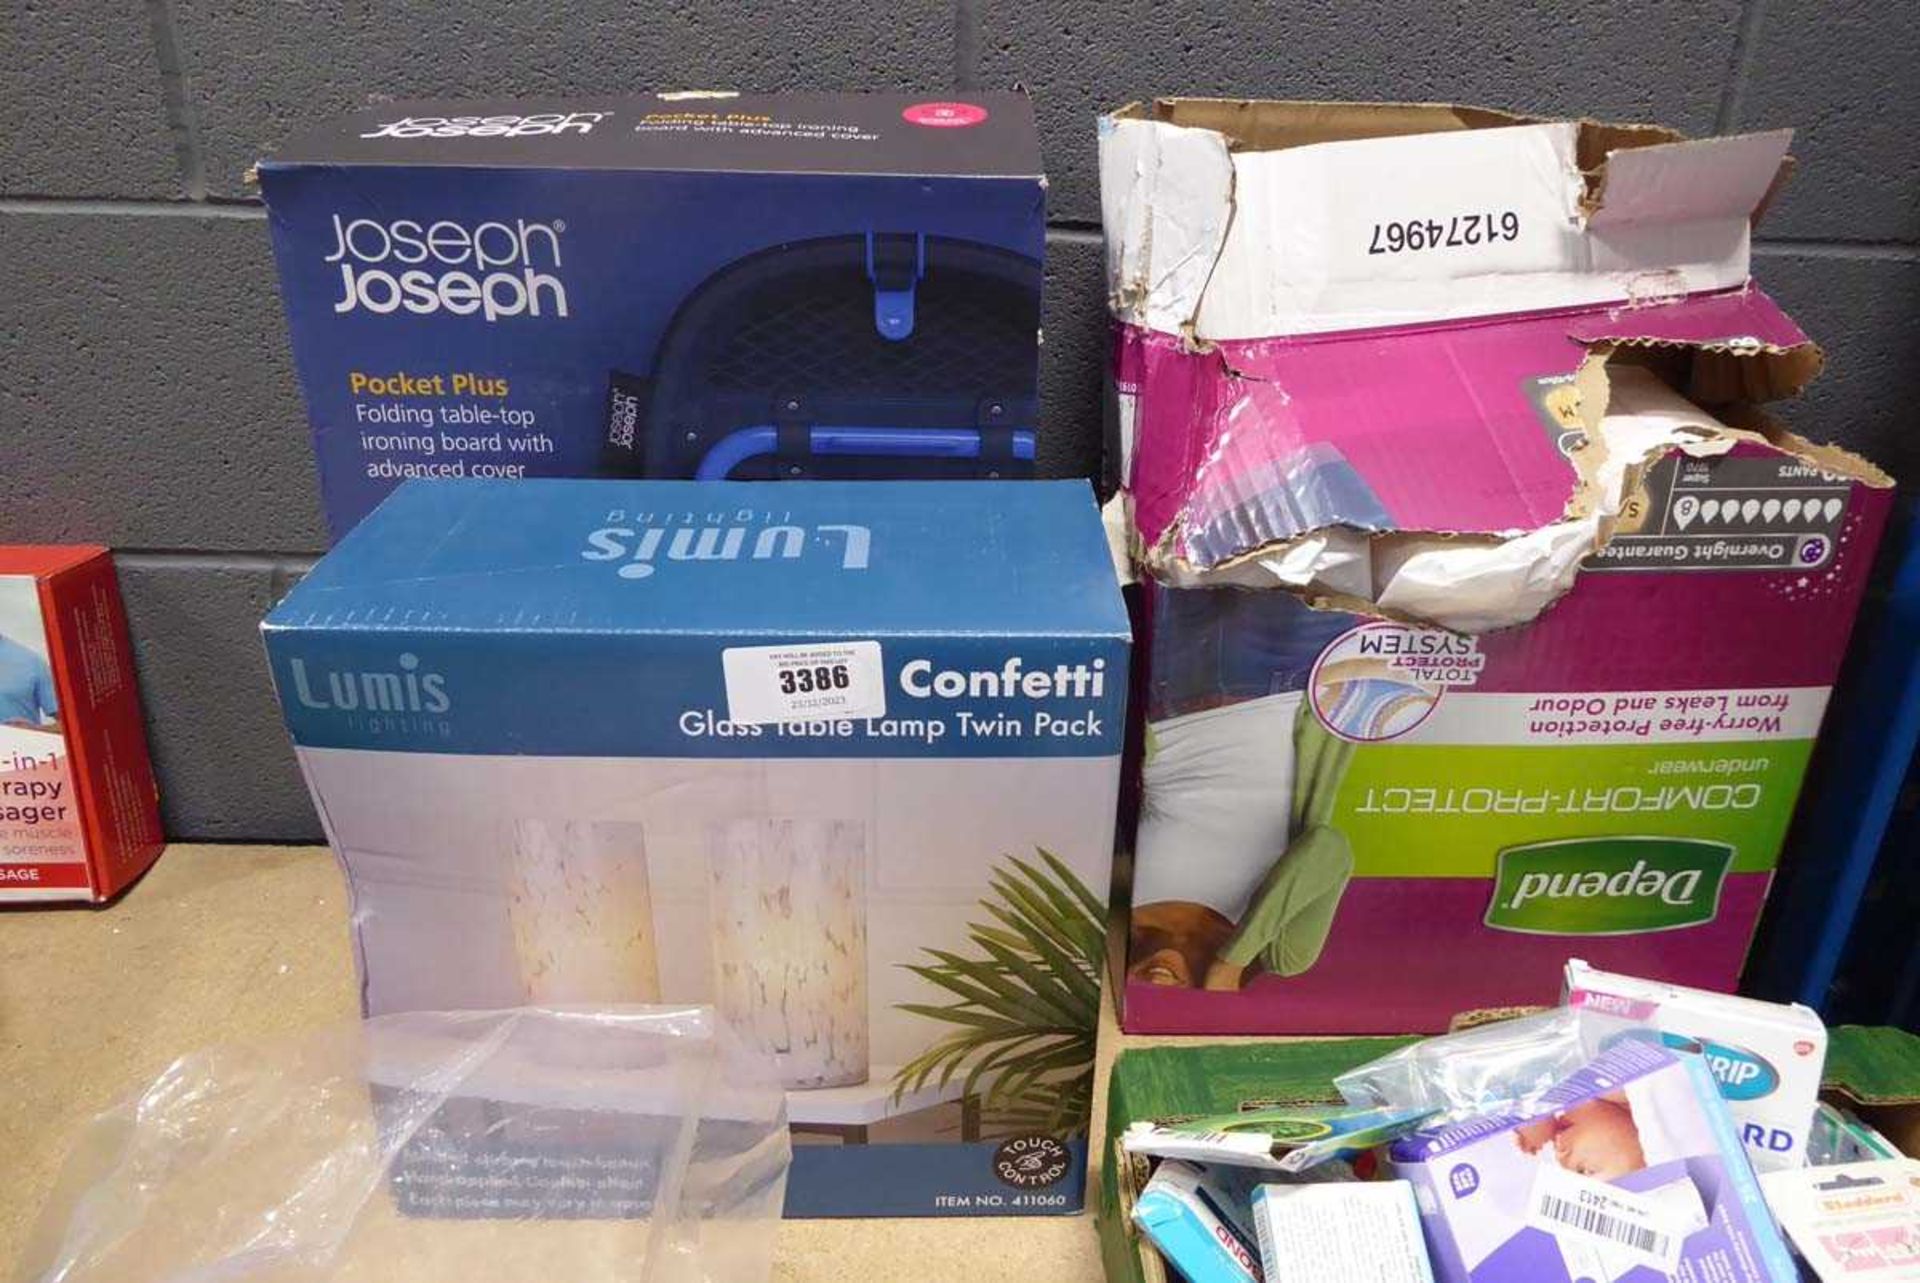 +VAT Pair of table lamps, Joseph Joseph pocket folding ironing boards, and box of protective